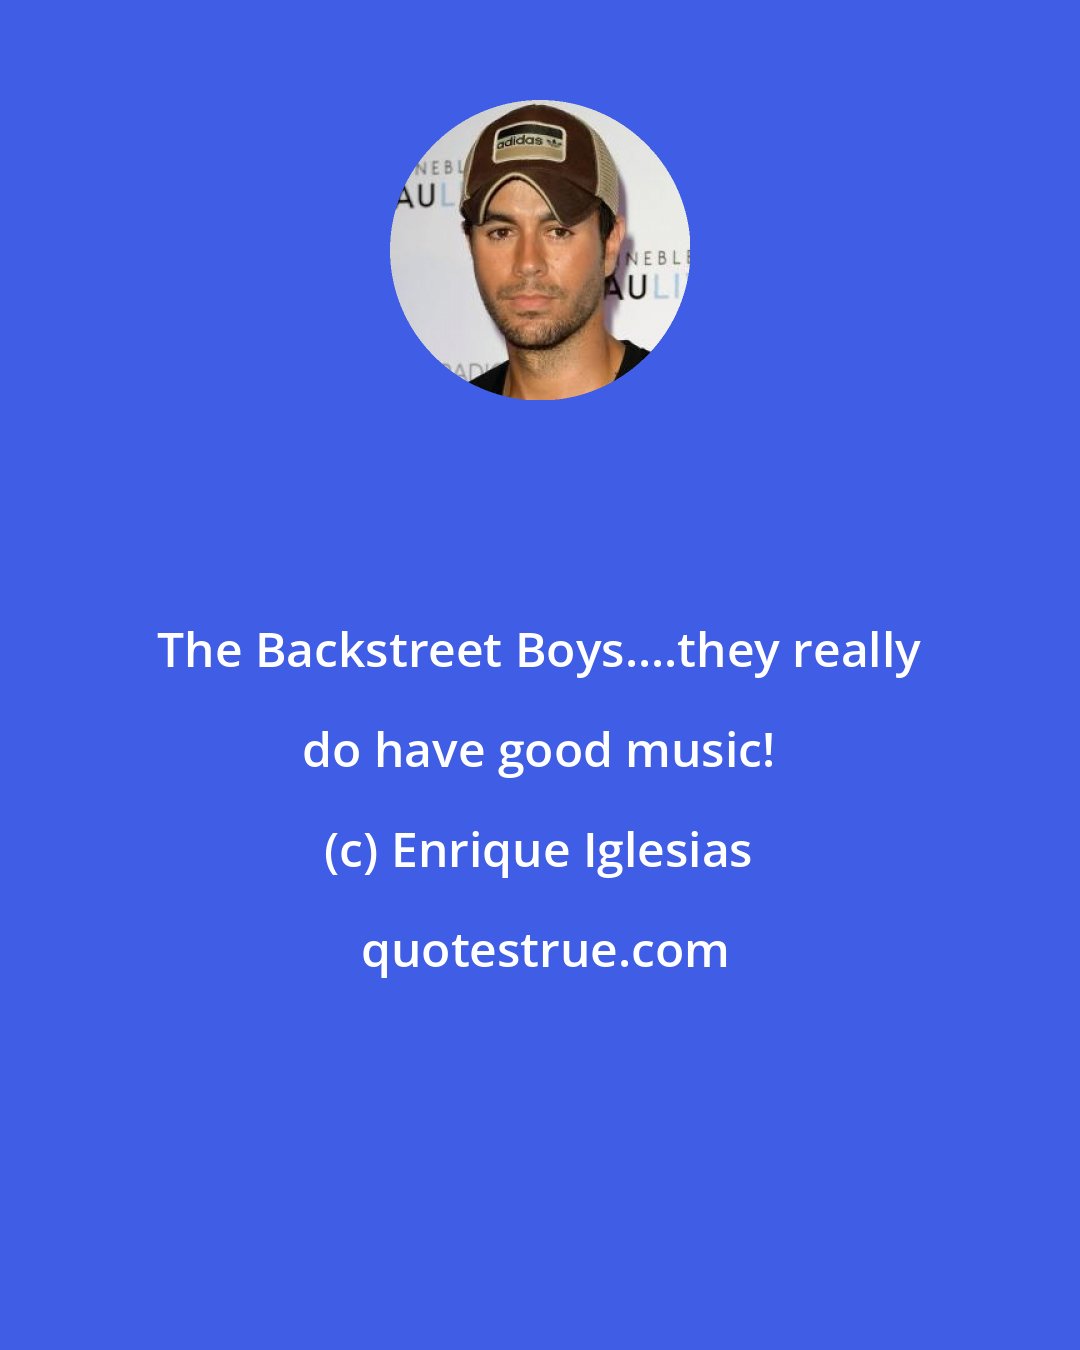 Enrique Iglesias: The Backstreet Boys....they really do have good music!